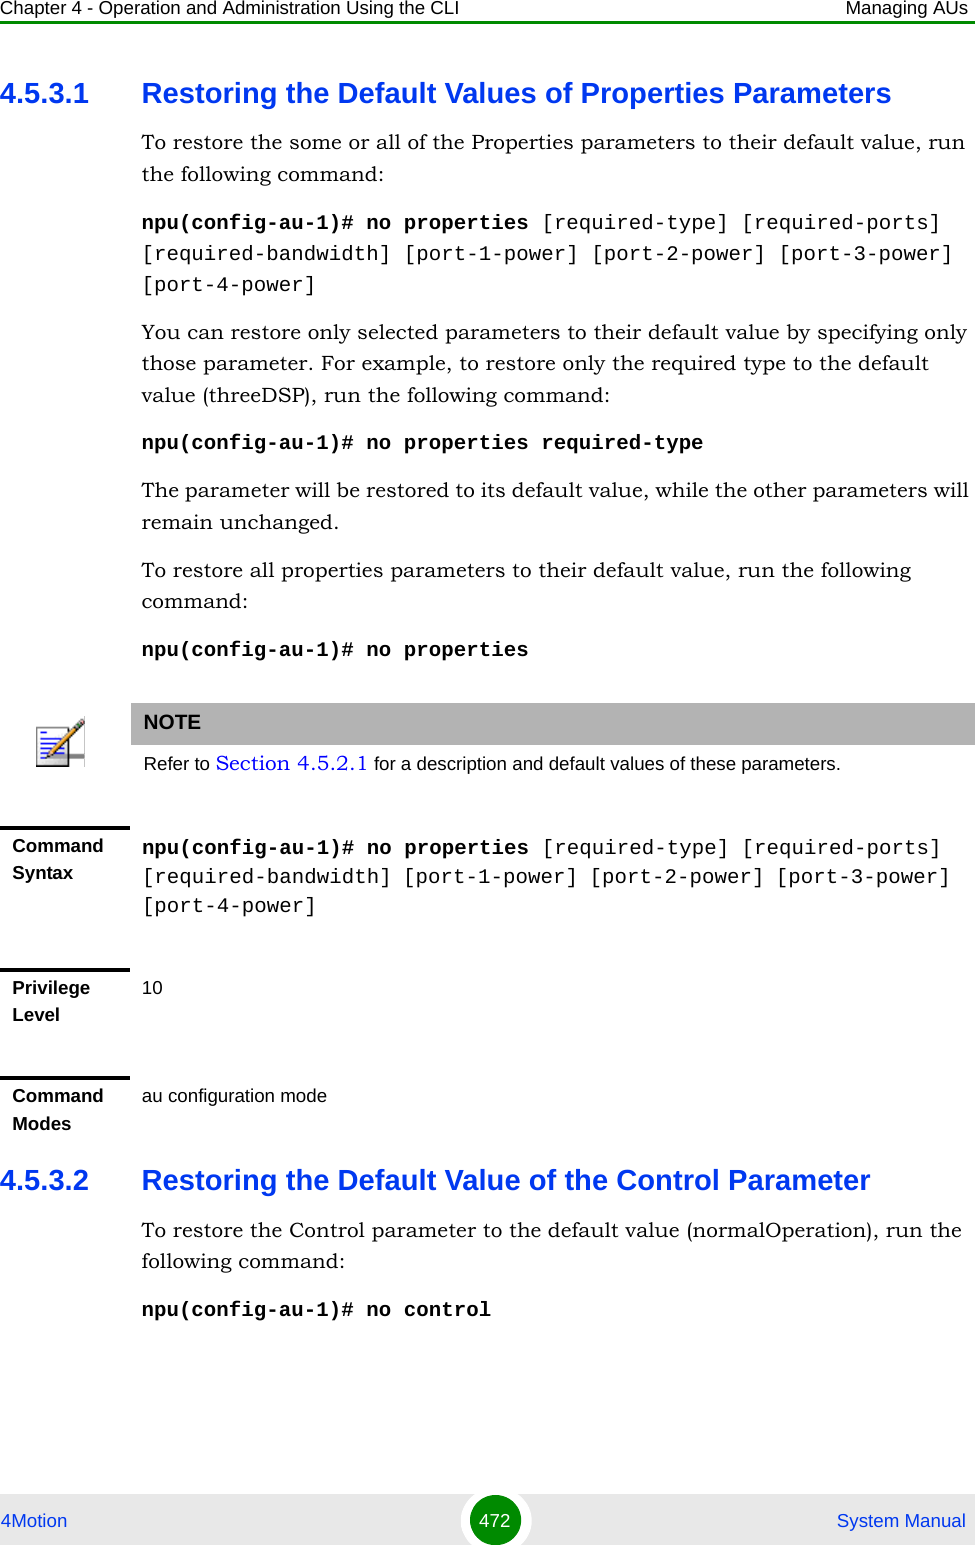 Chapter 4 - Operation and Administration Using the CLI Managing AUs4Motion 472  System Manual4.5.3.1 Restoring the Default Values of Properties ParametersTo restore the some or all of the Properties parameters to their default value, run the following command:npu(config-au-1)# no properties [required-type] [required-ports] [required-bandwidth] [port-1-power] [port-2-power] [port-3-power] [port-4-power]You can restore only selected parameters to their default value by specifying only those parameter. For example, to restore only the required type to the default value (threeDSP), run the following command:npu(config-au-1)# no properties required-typeThe parameter will be restored to its default value, while the other parameters will remain unchanged.To restore all properties parameters to their default value, run the following command:npu(config-au-1)# no properties4.5.3.2 Restoring the Default Value of the Control ParameterTo restore the Control parameter to the default value (normalOperation), run the following command:npu(config-au-1)# no controlNOTERefer to Section 4.5.2.1 for a description and default values of these parameters.Command Syntaxnpu(config-au-1)# no properties [required-type] [required-ports] [required-bandwidth] [port-1-power] [port-2-power] [port-3-power] [port-4-power]Privilege Level10Command Modesau configuration mode